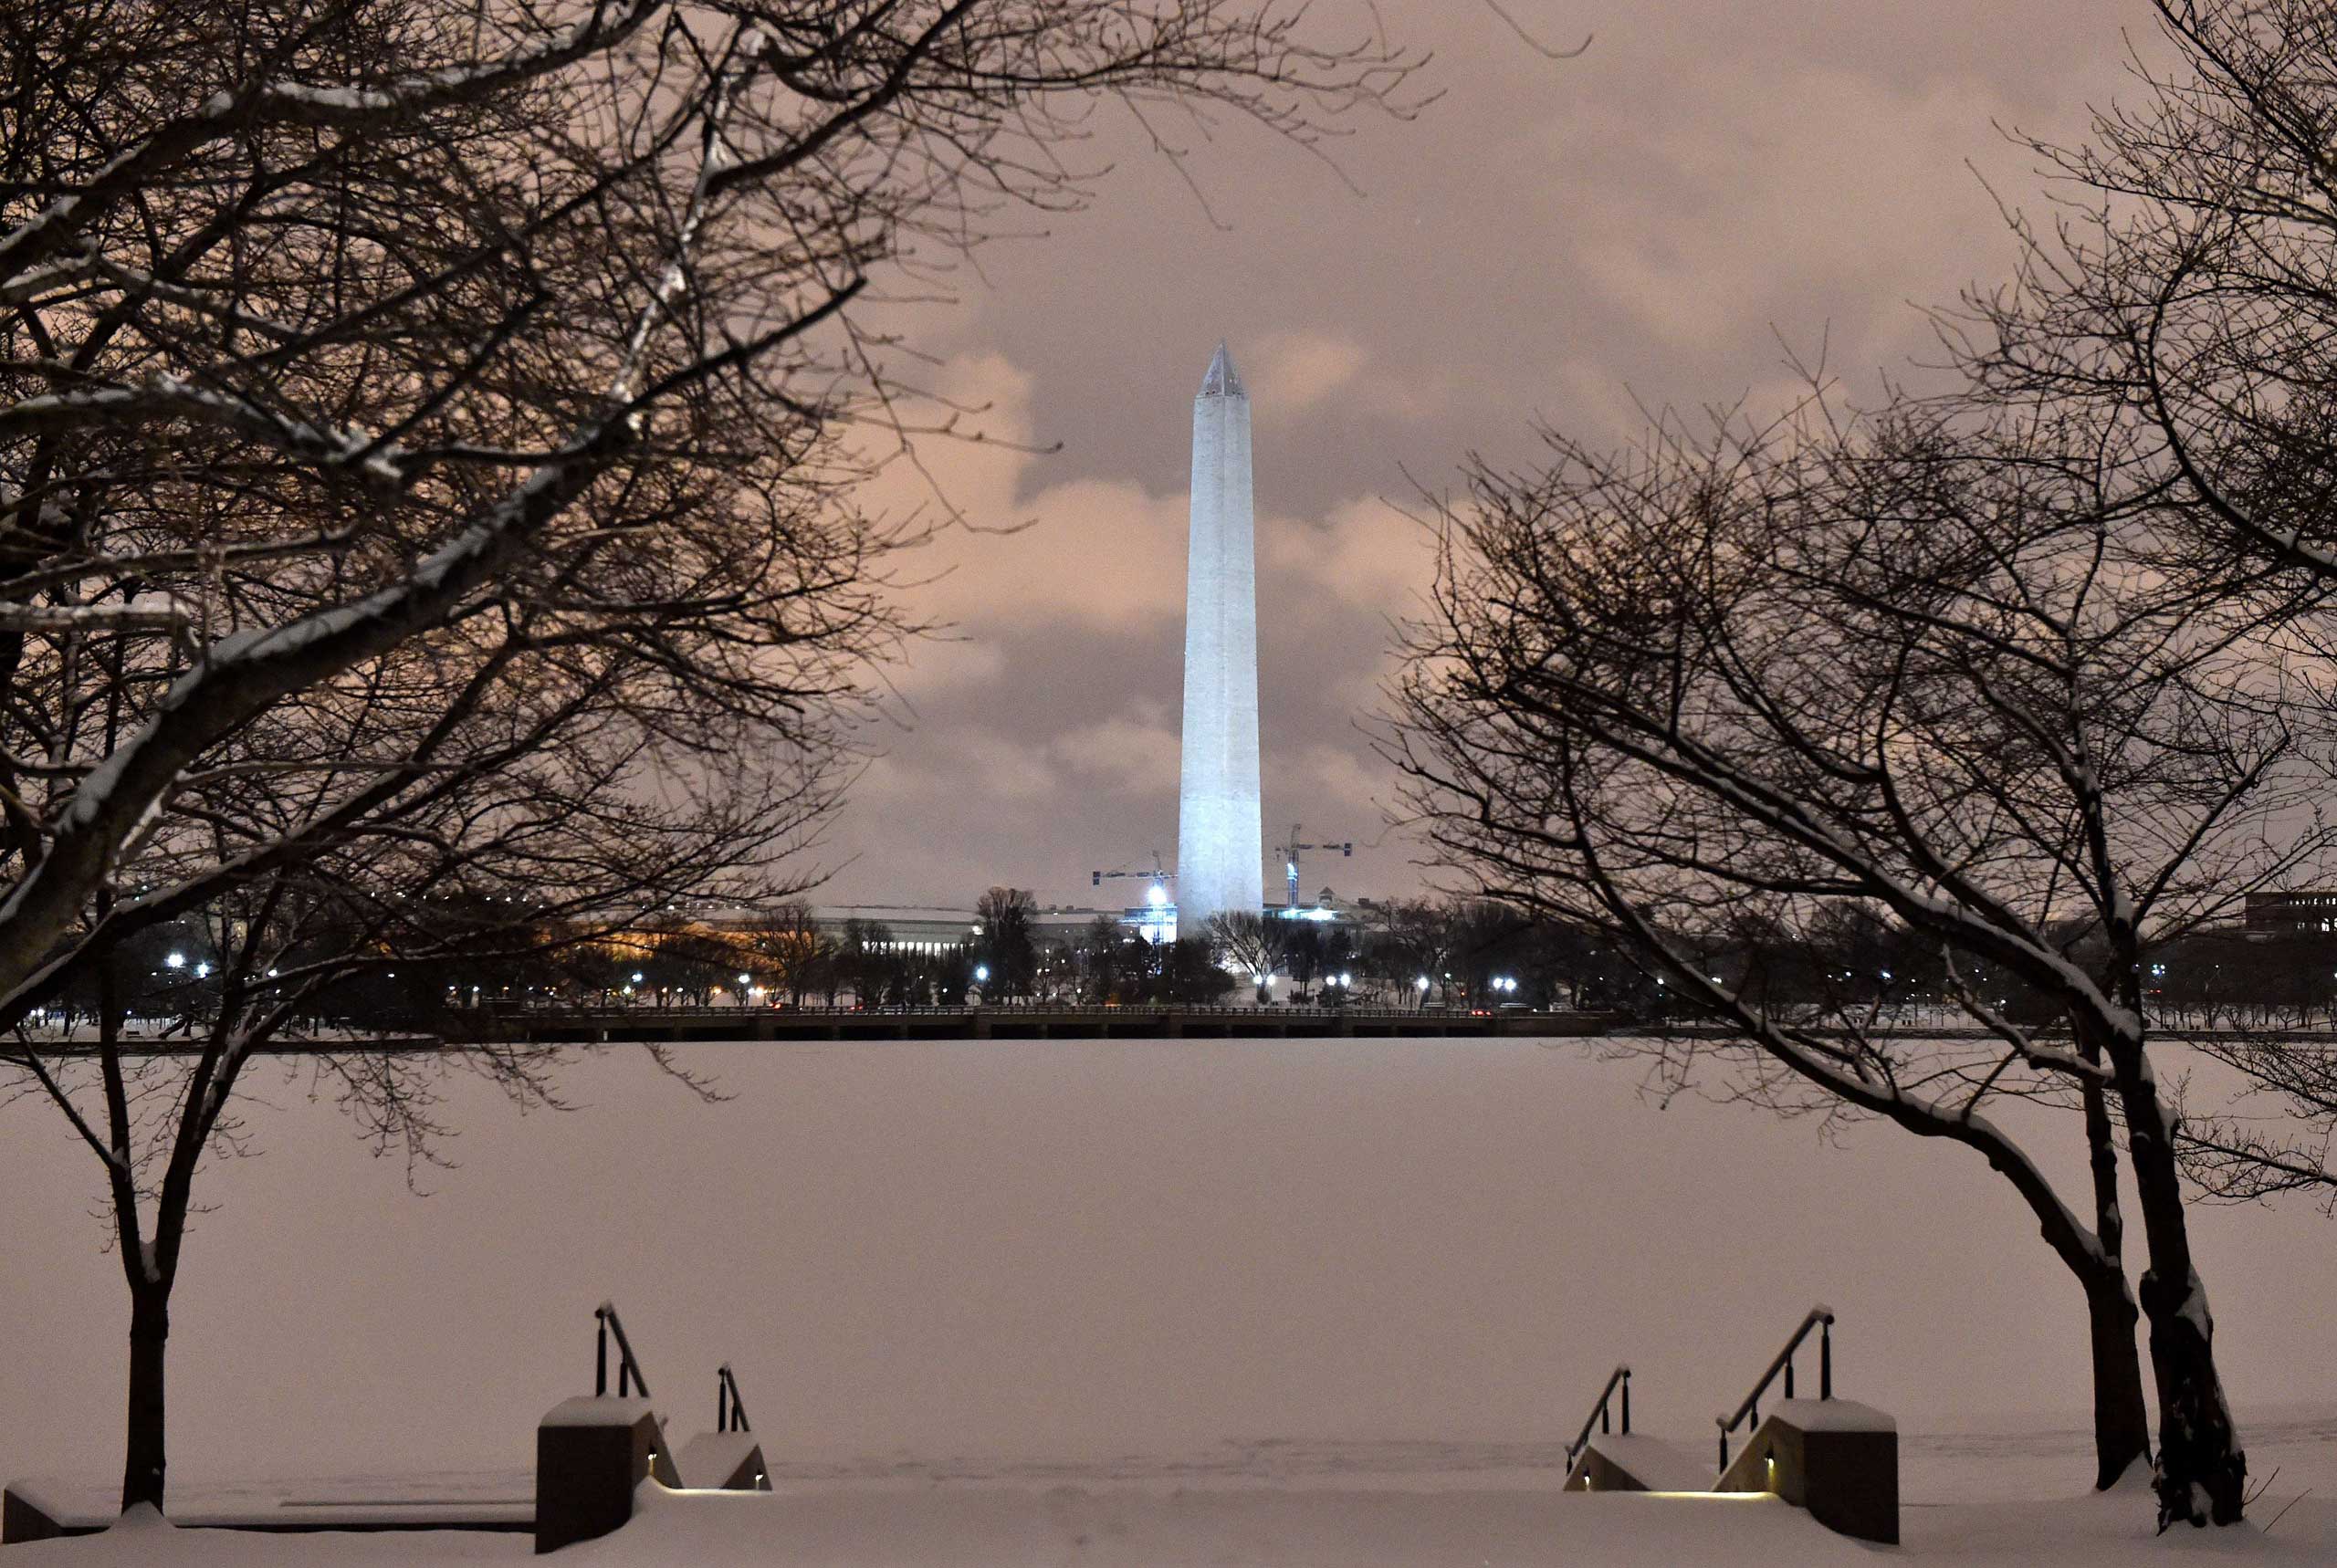 Snow covers the Tidal Basin in front of the Washington Memorial in Washington on Feb. 16, 2015.